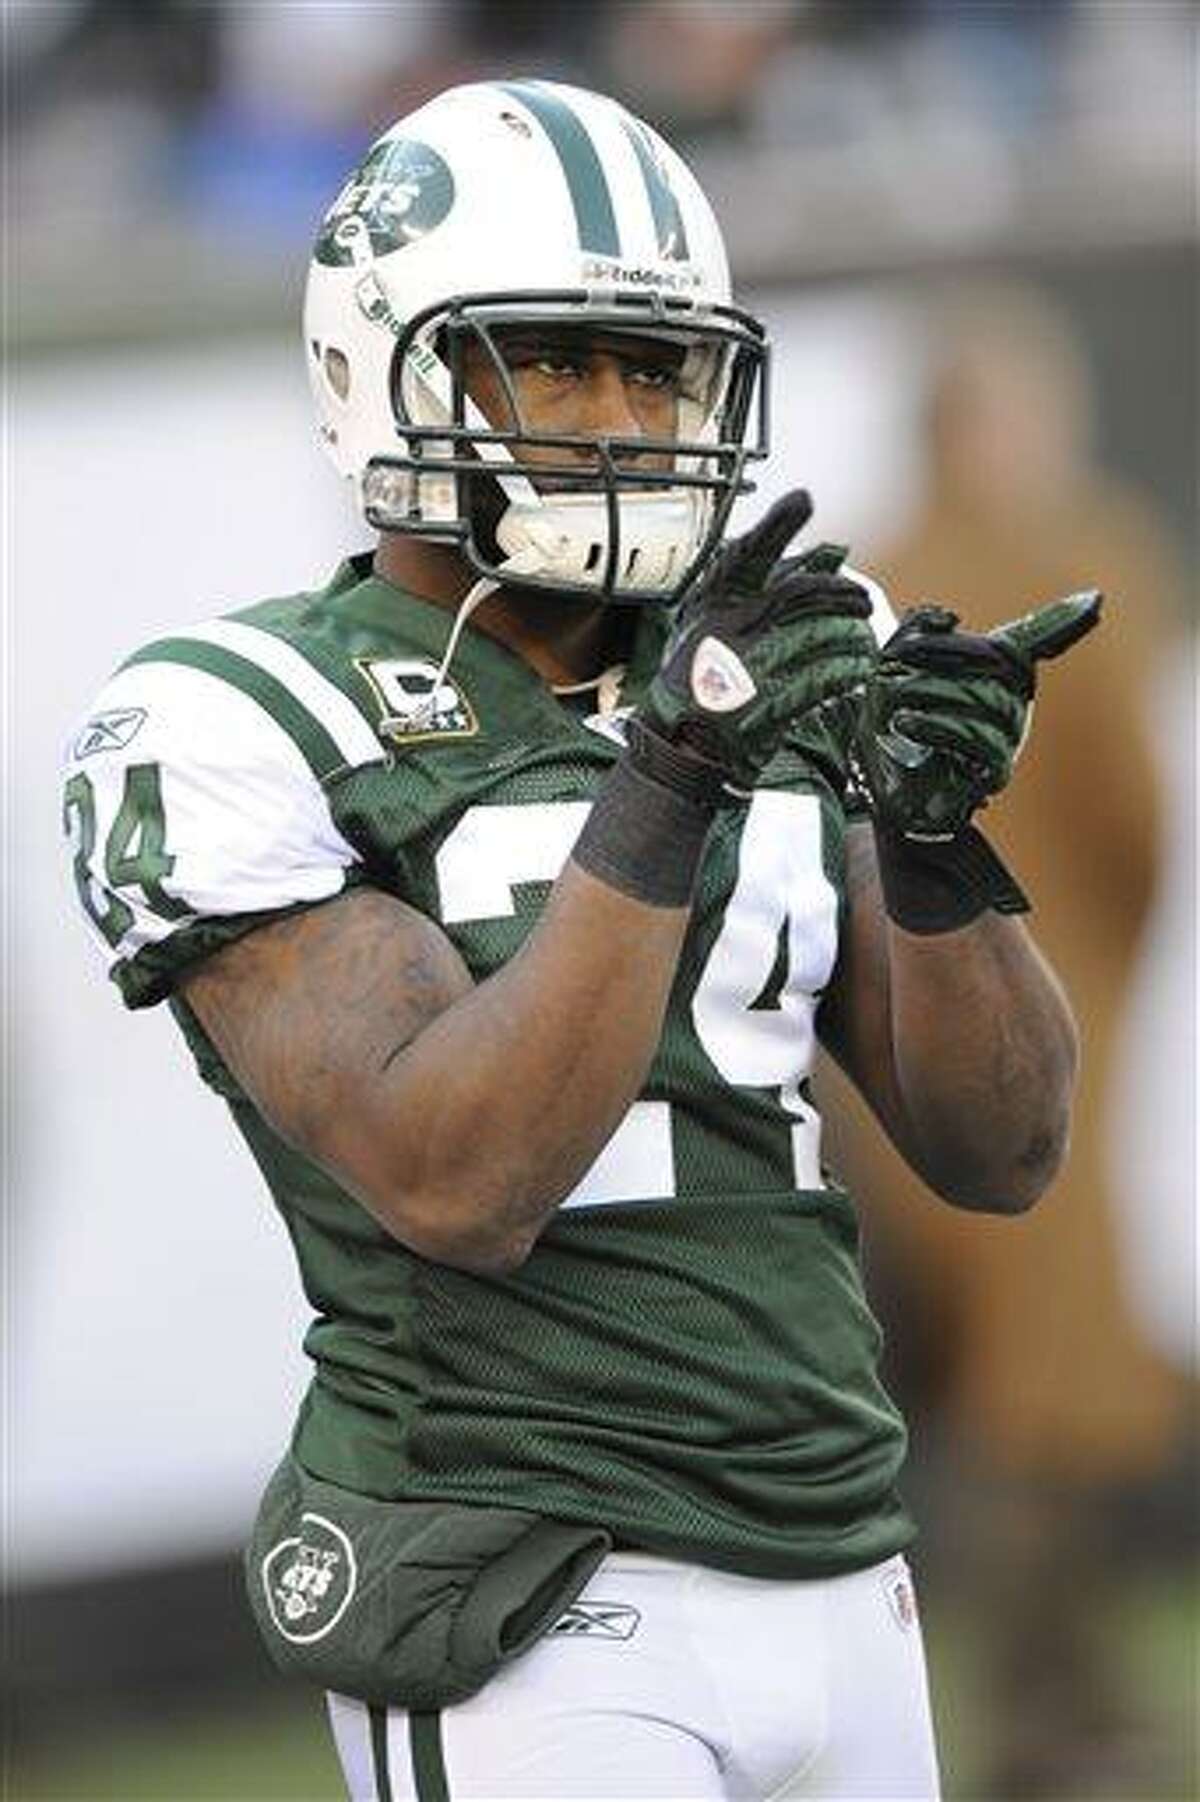 File-This Dec. 24, 2011 file photo shows New York Jets' Darrelle Revis pointing before an NFL football game between the New York Giants and the New York Jets in East Rutherford, N.J. The Jets have traded Revis to the Buccaneers for this year's No. 13 overall draft pick and another selection next year. (AP Photo/Bill Kostroun, File)